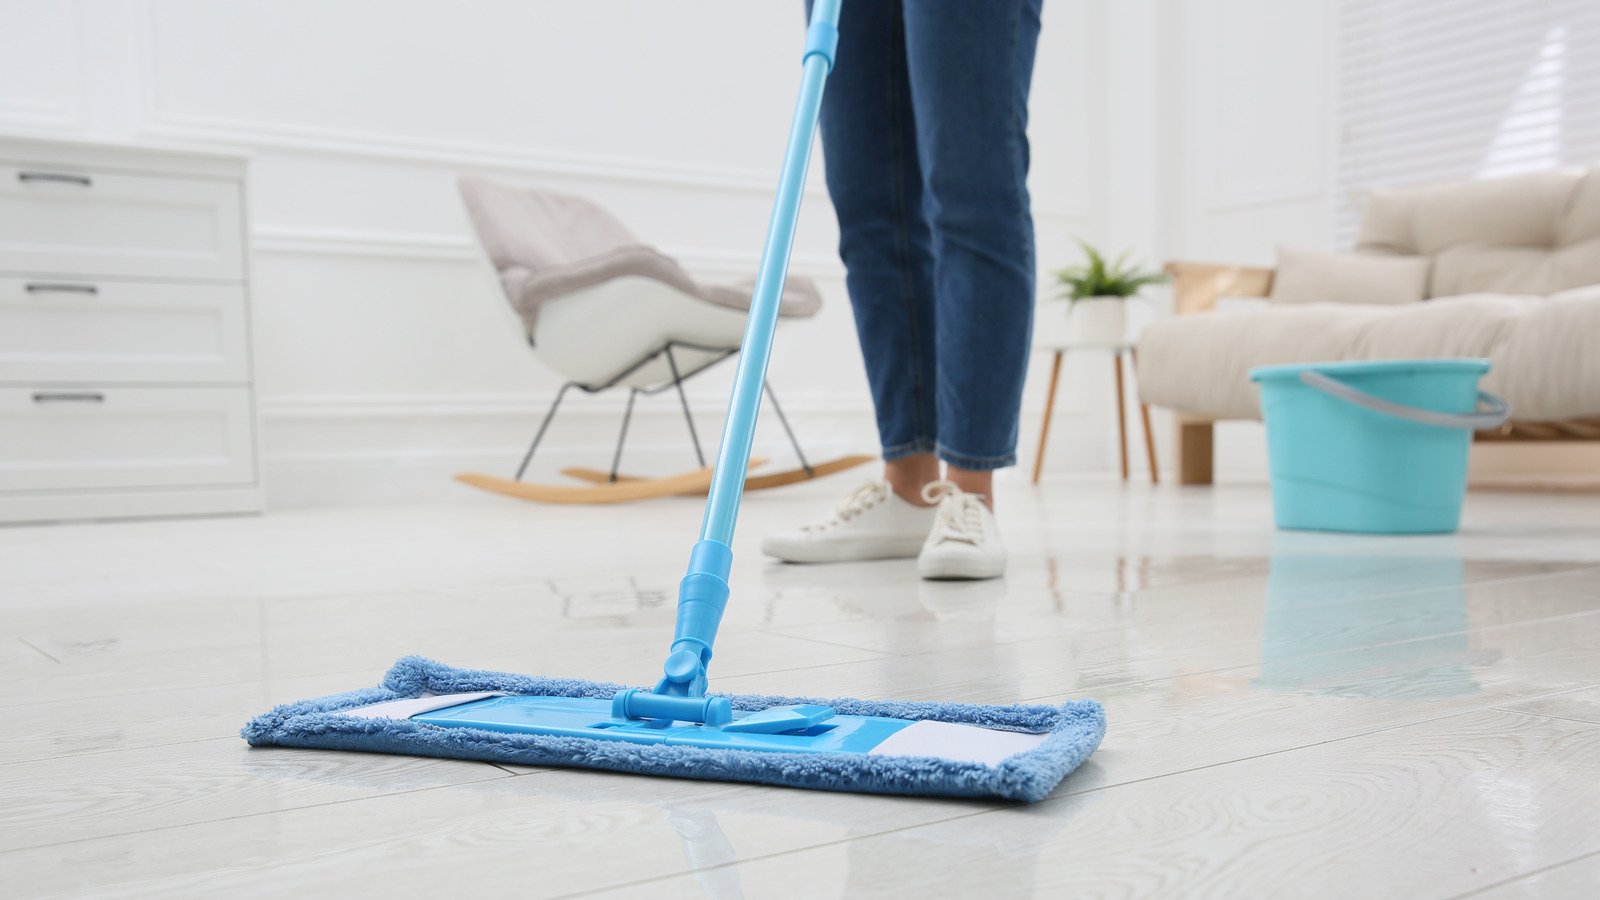 TikTok's Helpful Tip Will Have Your Floors Looking Cleaner Than Ever